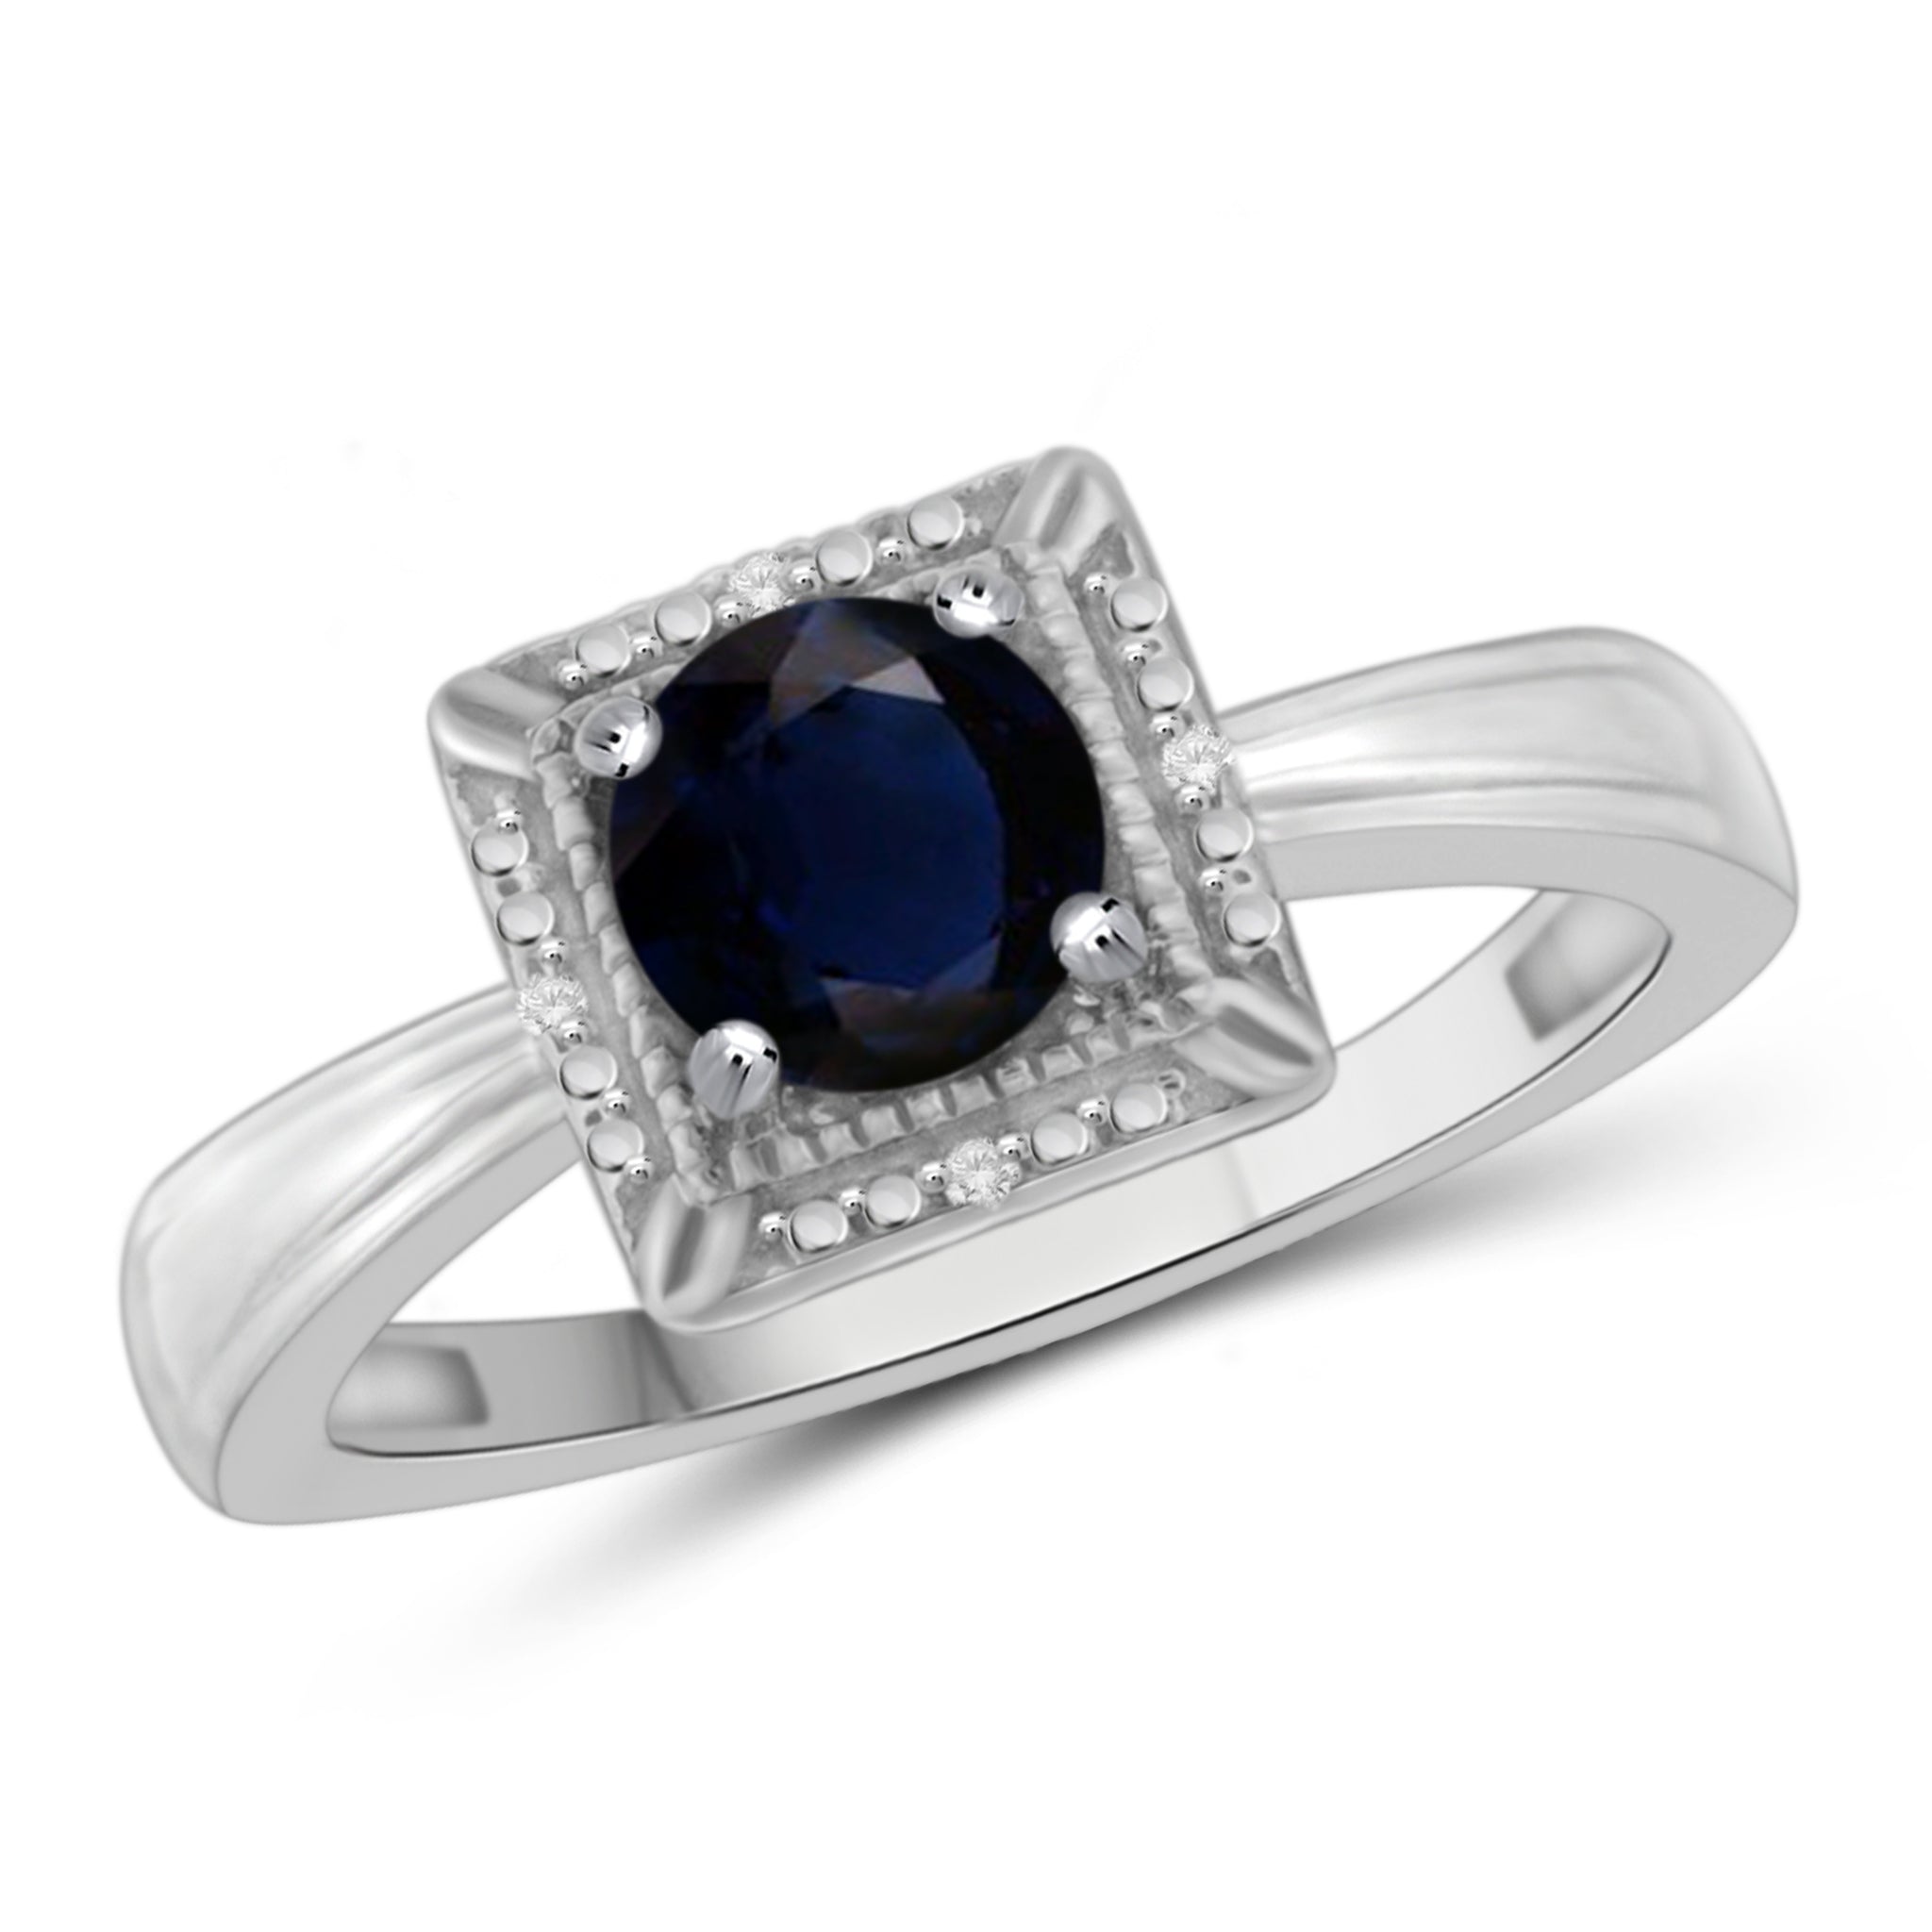 JewelonFire 1 1/5 Carat T.G.W. Sapphire and White Diamond Accent Sterling Silver Ring - Assorted Colors